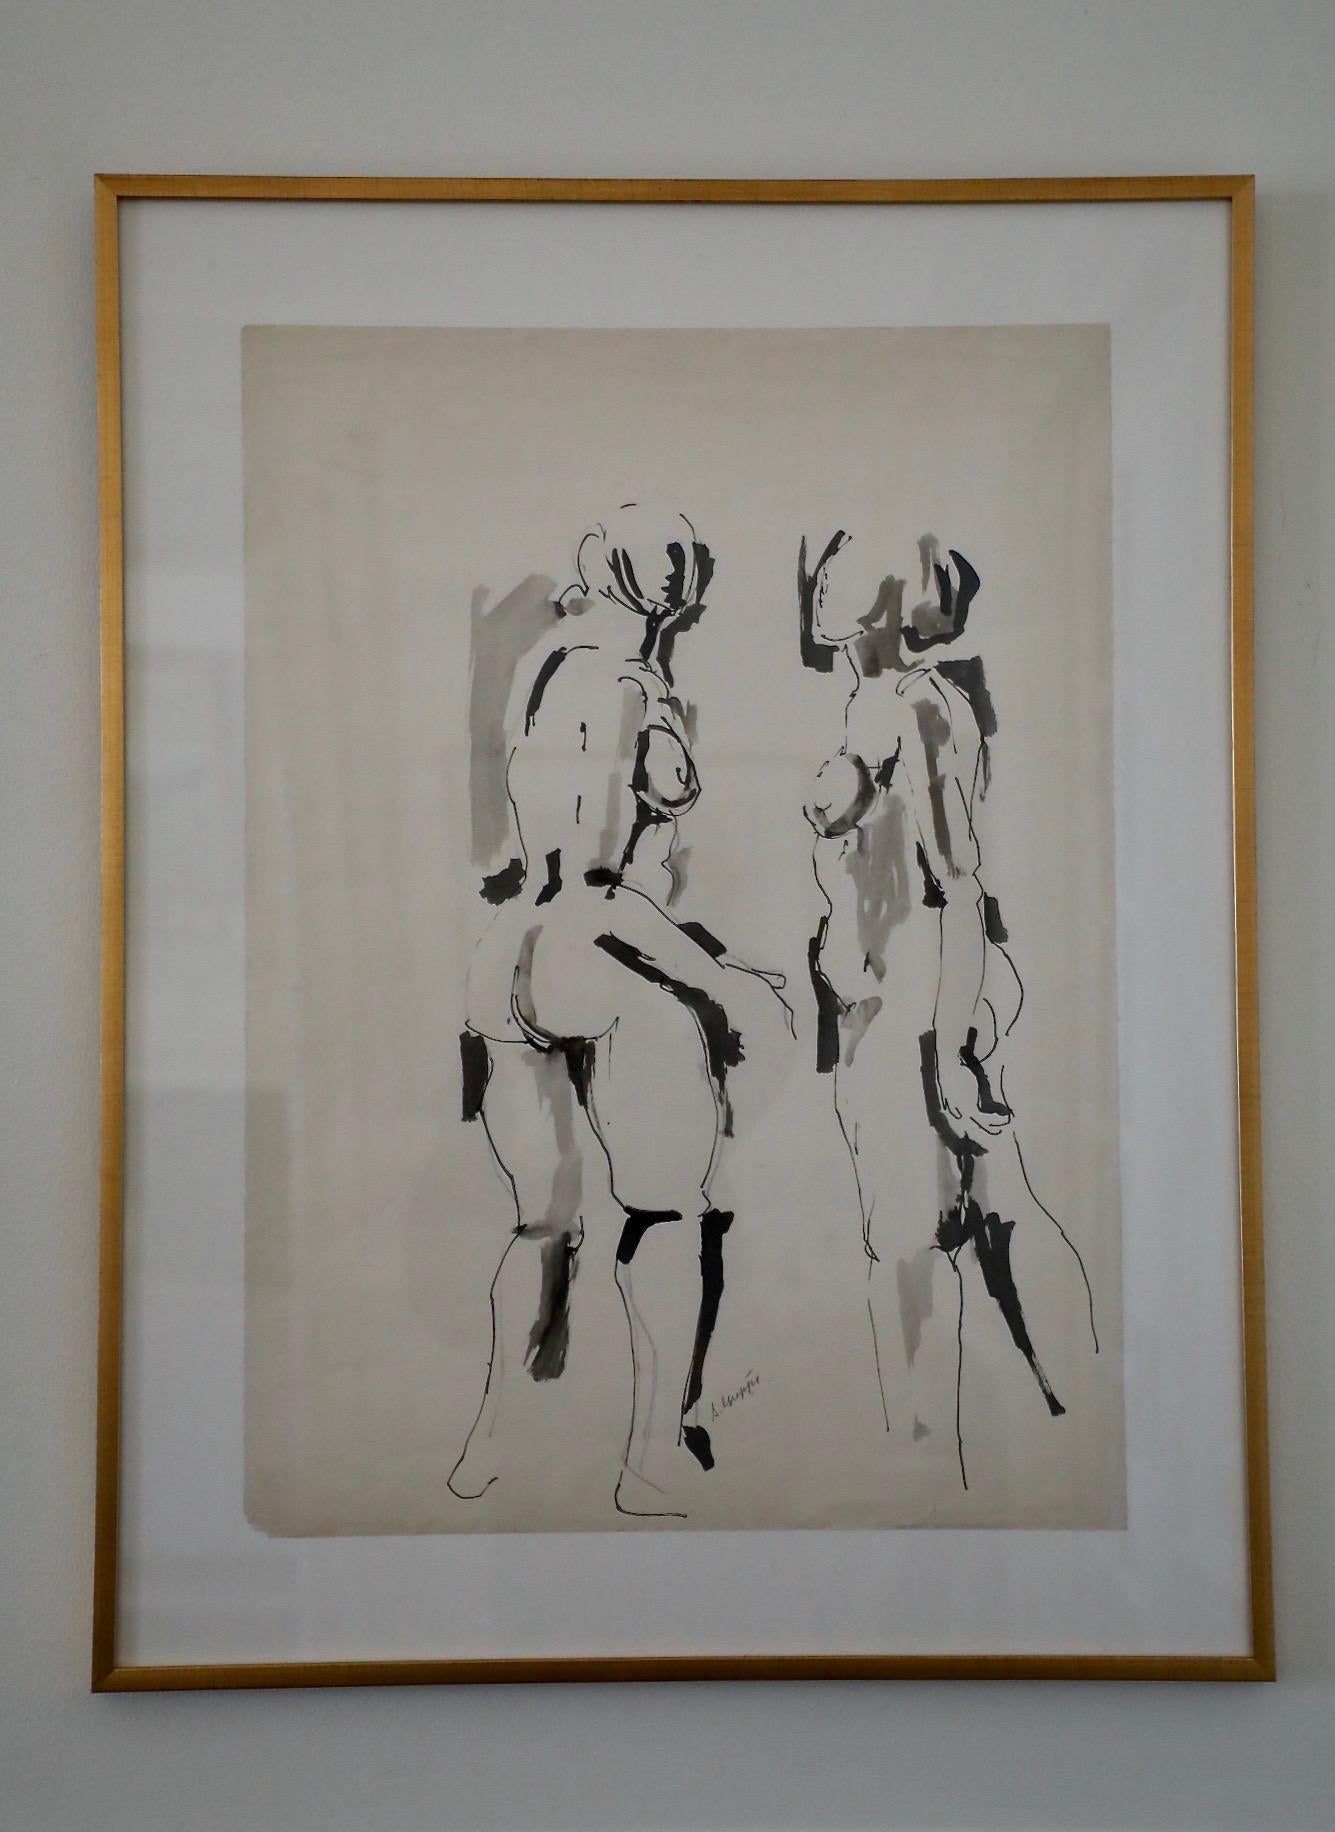 This is an example of Salvatore Grippi's iconic figural works.  Signed in pencil.  Purchased from his estate via auction.  Paper size:  25 7/8 x 18 3/4 inches.

An important member of the New York School of Abstract Expressionists, Grippi was born